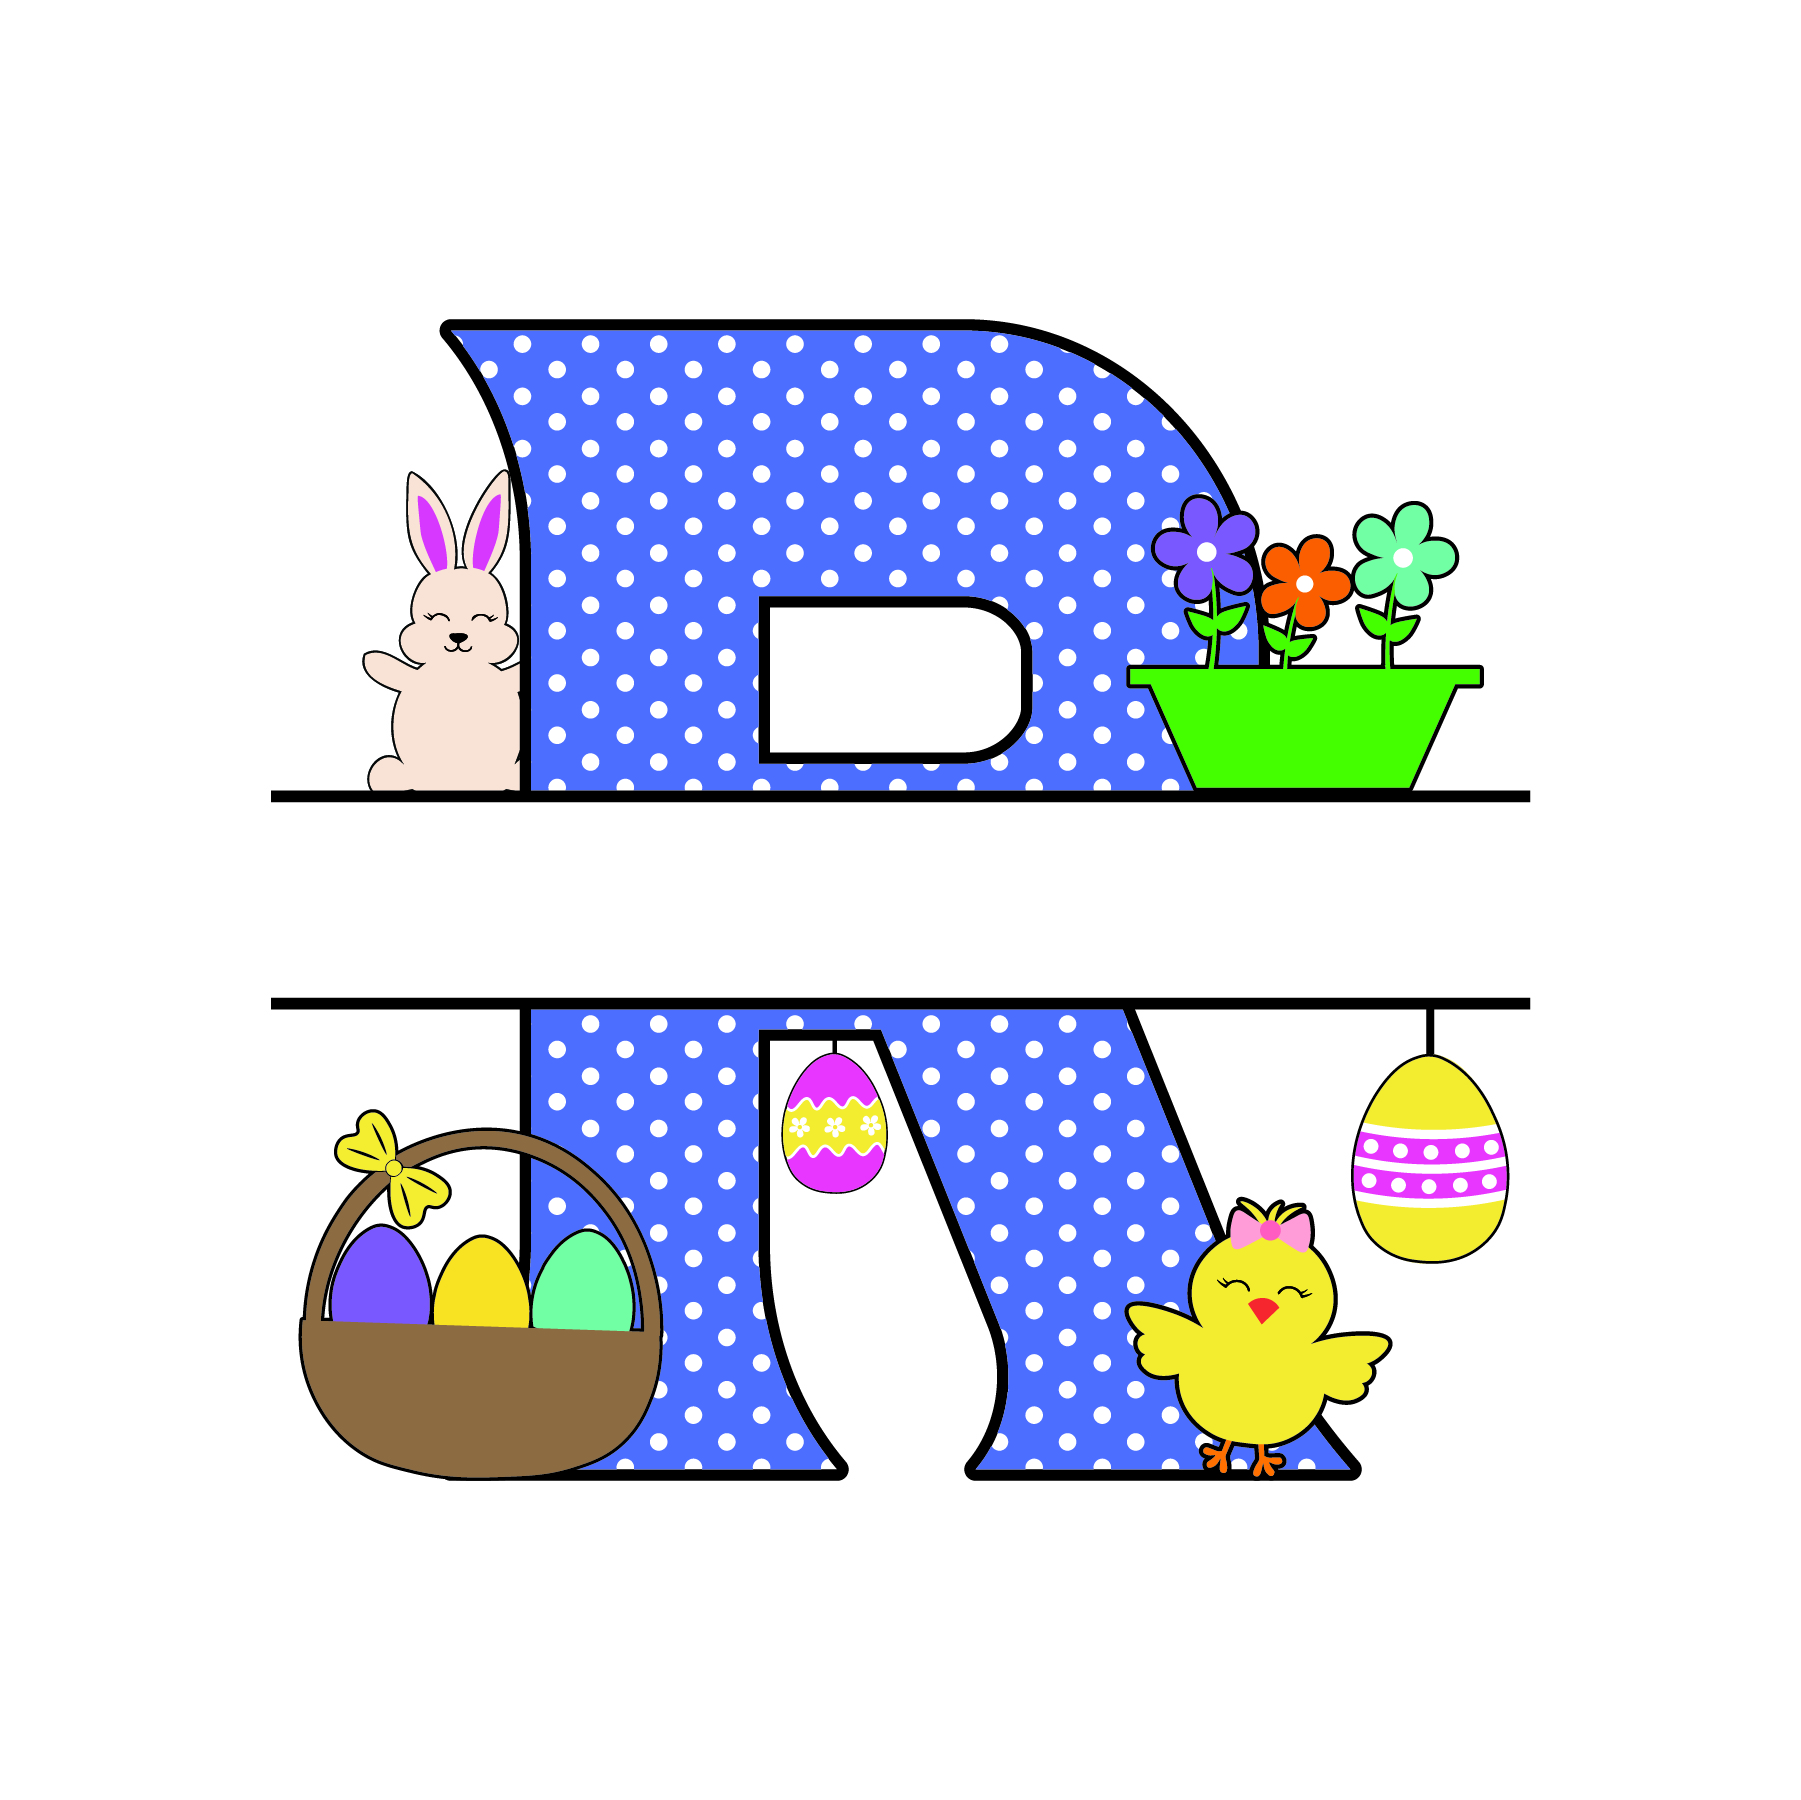 r letter free easter monogram bunny egg basket chicken clipart alphabet letter split customize or personalize stencil template to print or download vector svg laser vinyl circuit silhouette.